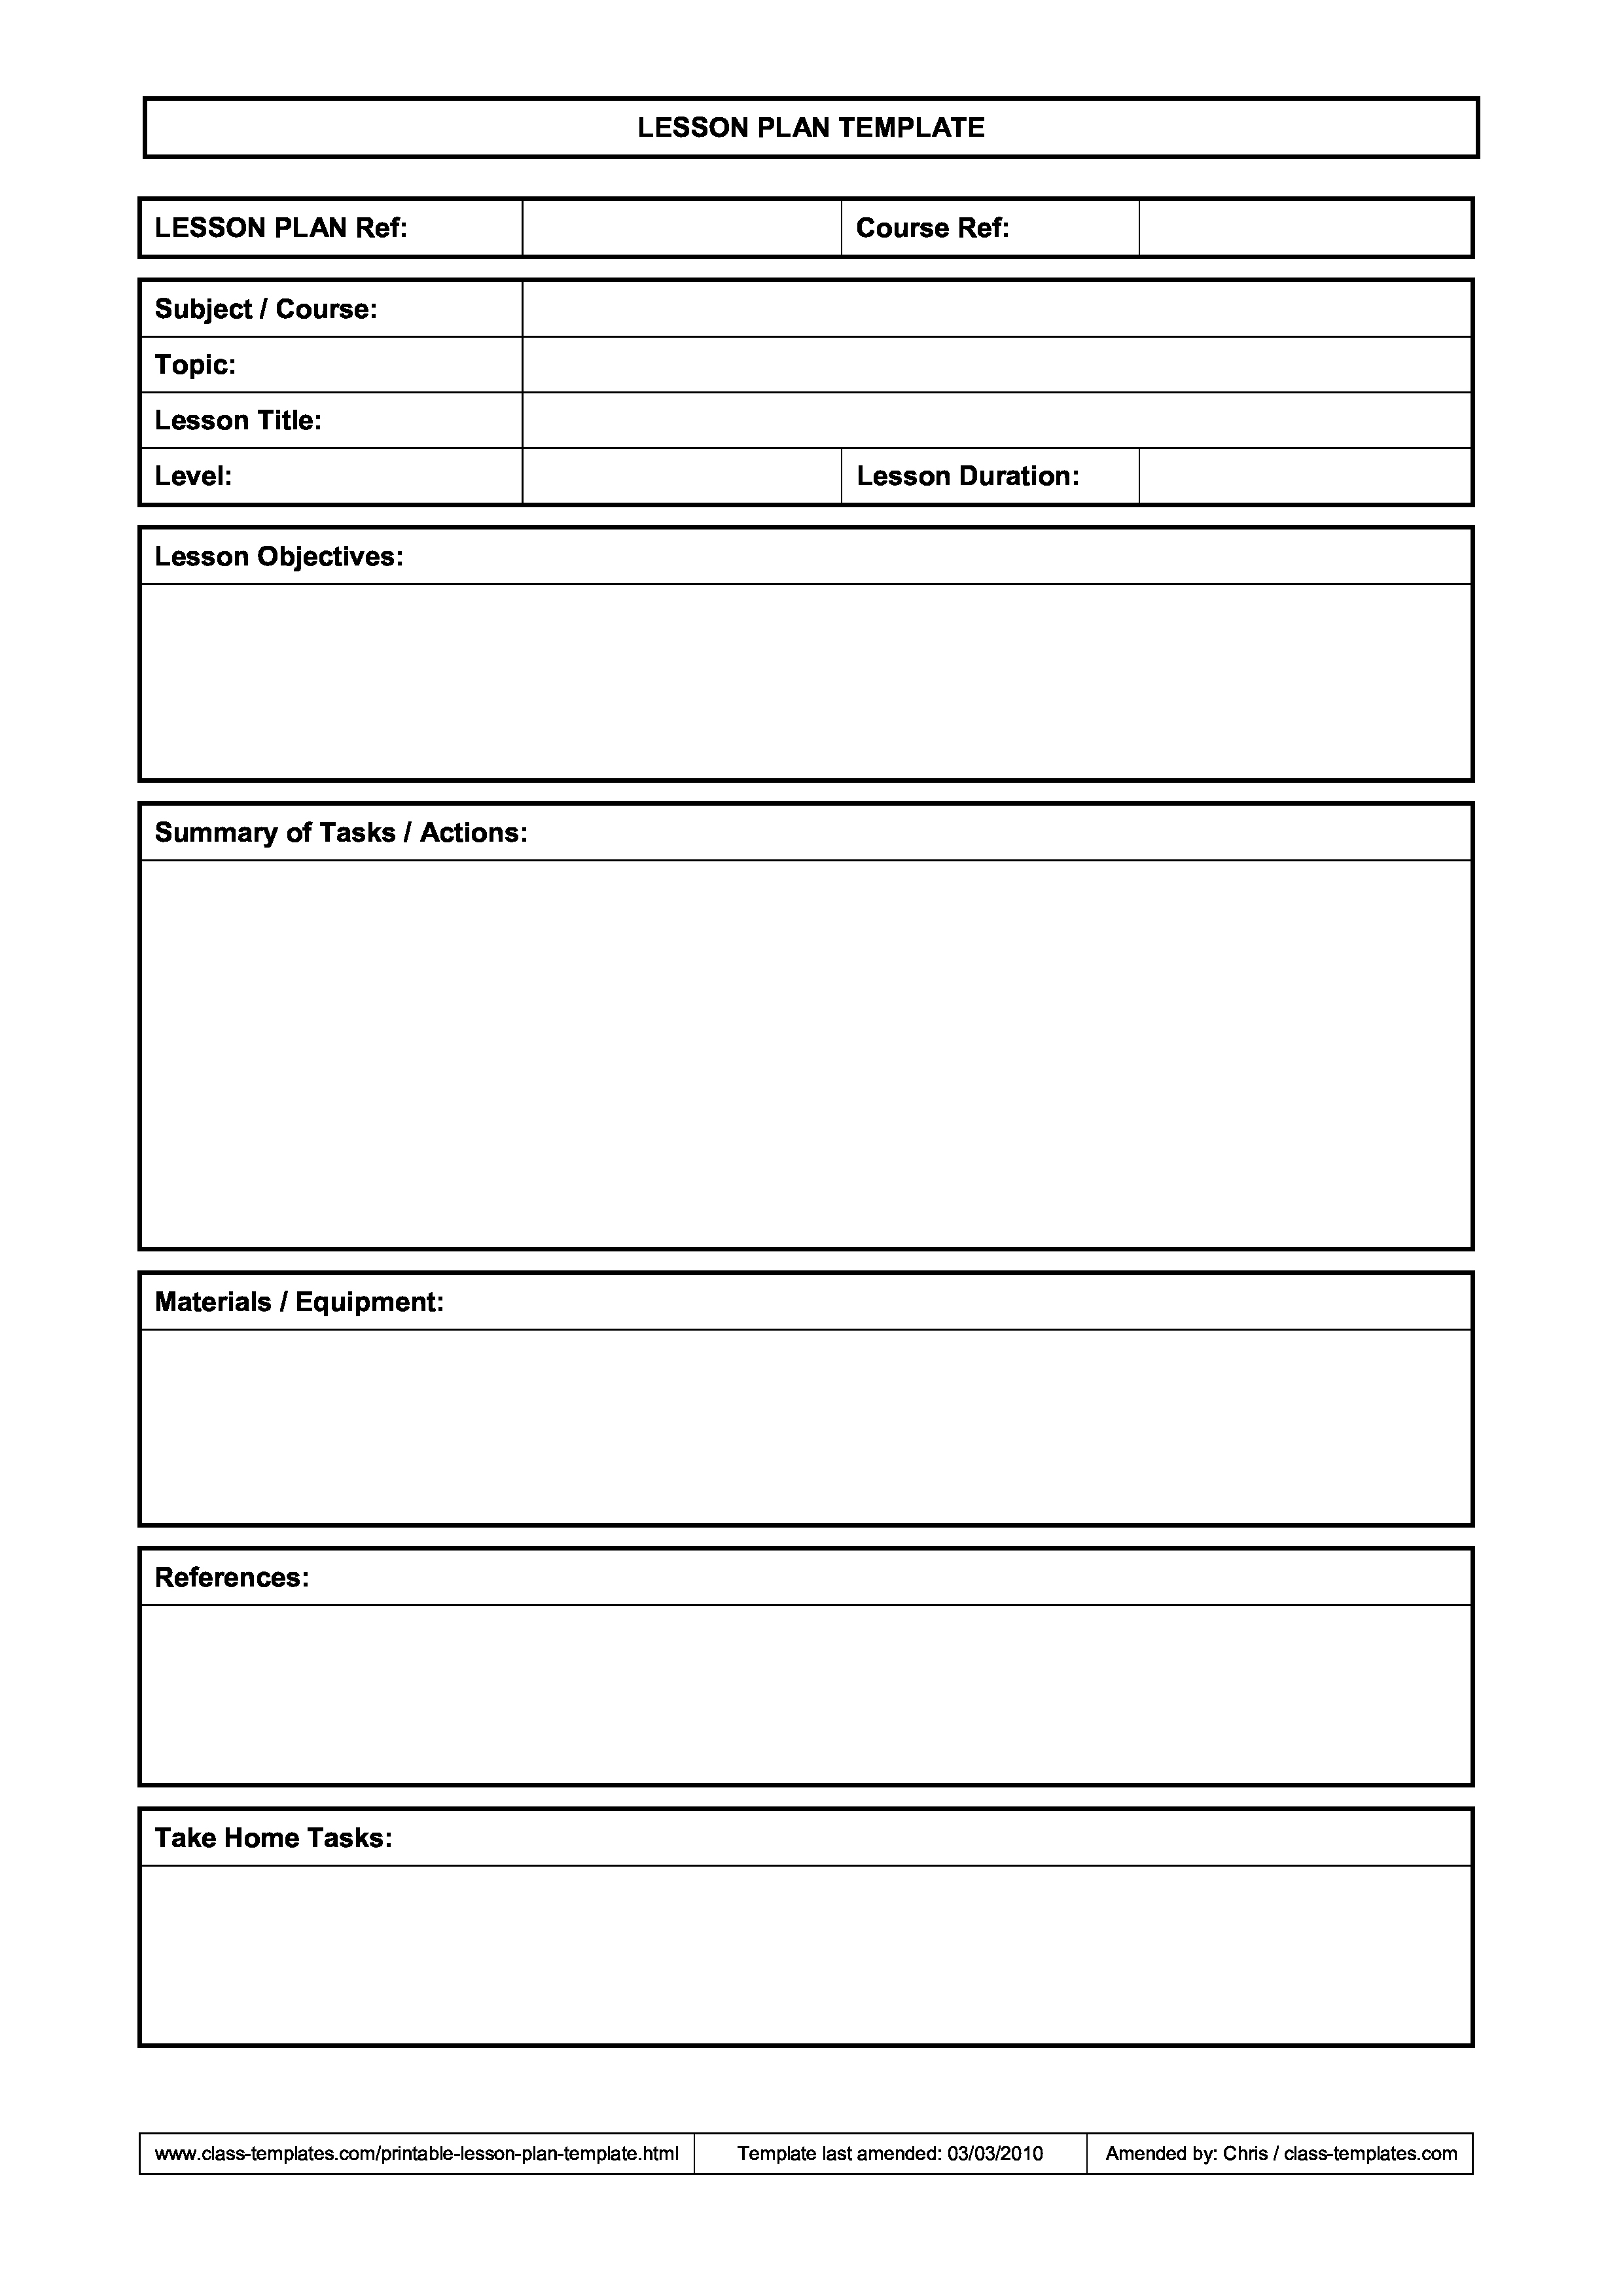 Free Printable Lesson Plan Template Awesome Free Printable Lesson Plan Template